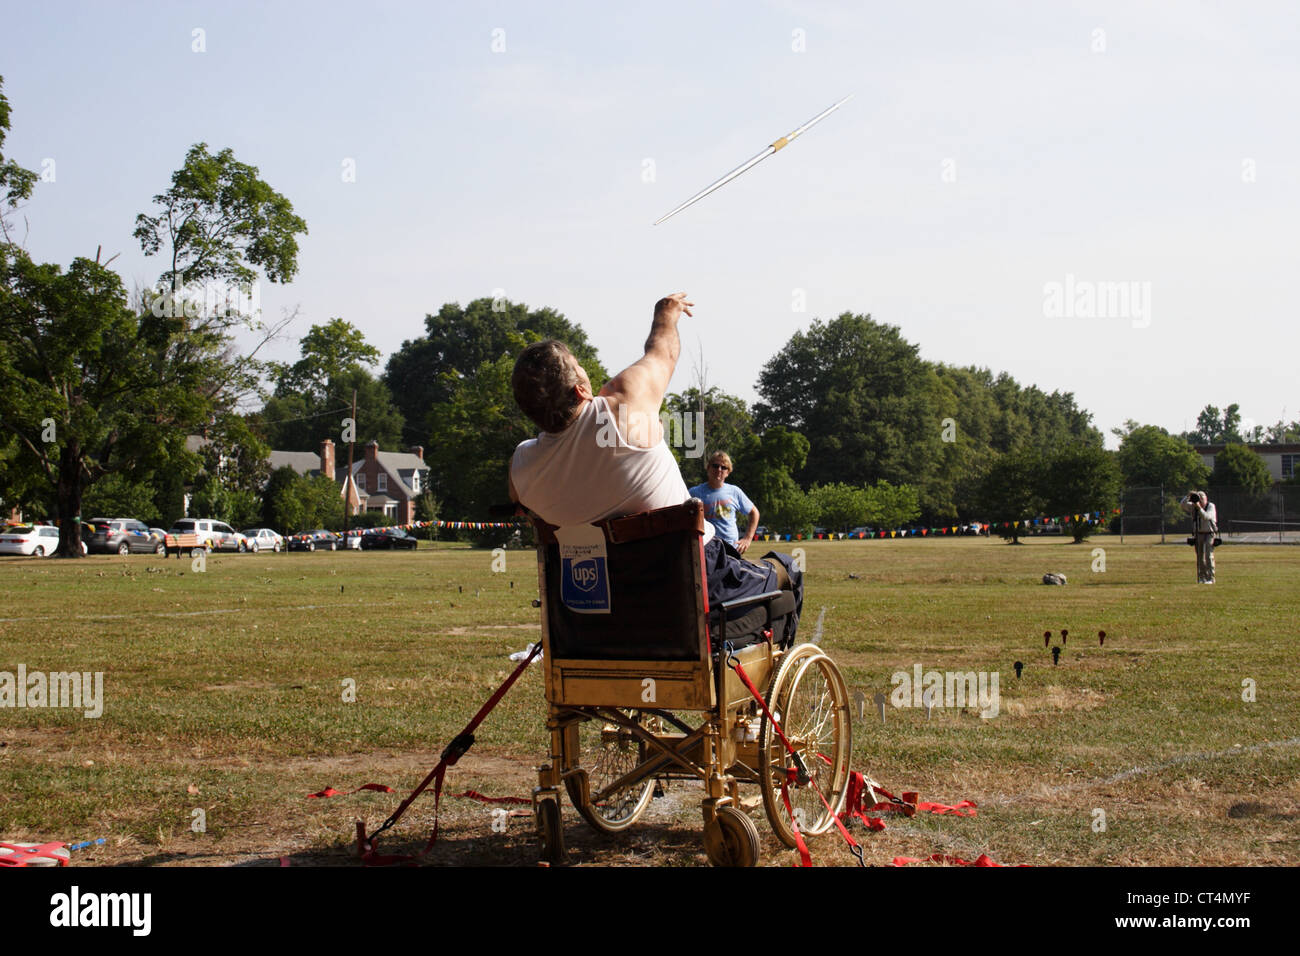 Roy Nungester, 66, of Circleville, Ohio, throws the Javelin at the 32nd National Veterans Wheelchair Games in Richmond, VA,USA Stock Photo